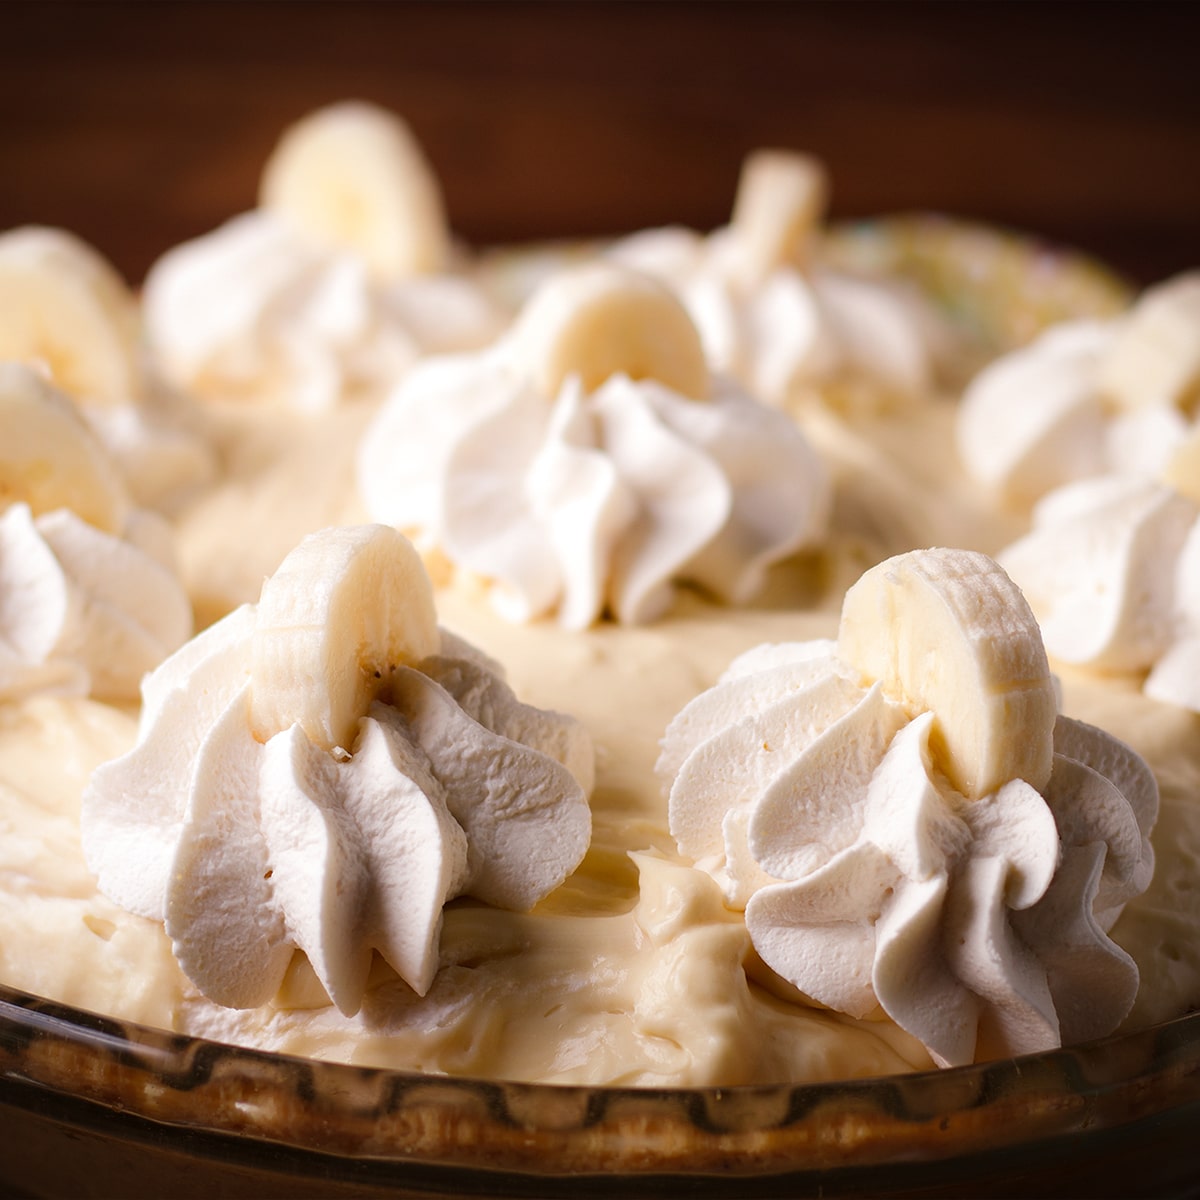 A black bottom banana cream pie that's been decorated with whipped cream and slices of banana.